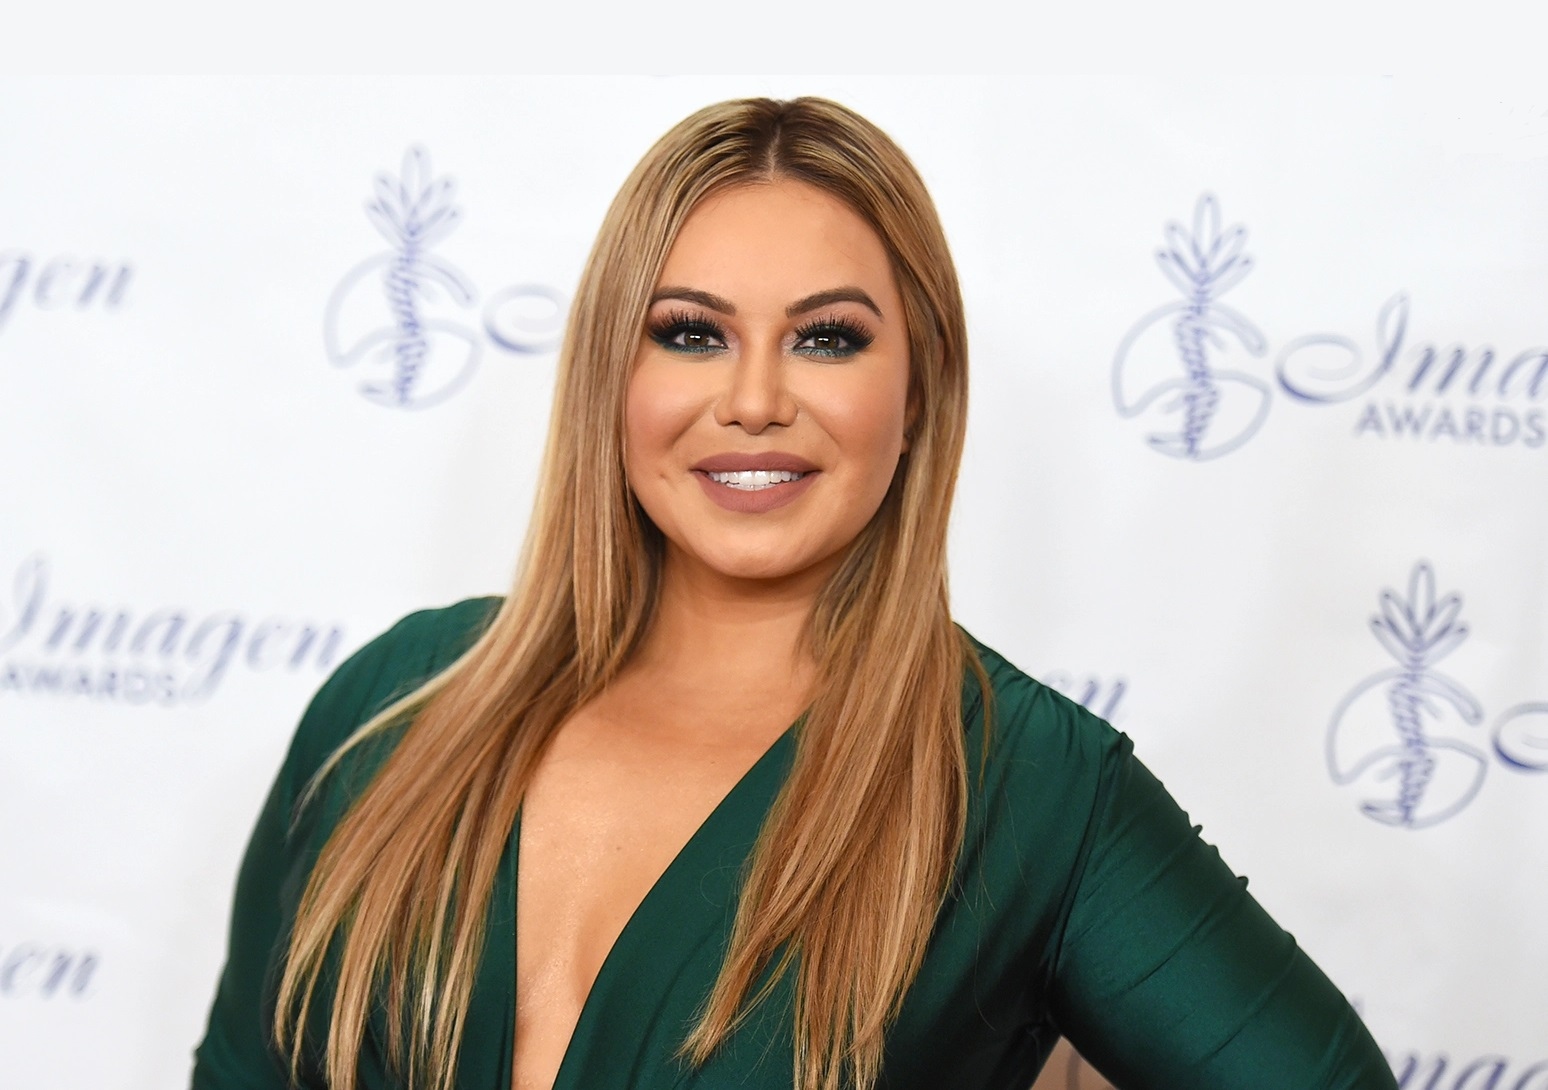 Chiquis Rivera wiggled in a gold dress and then went to Disney